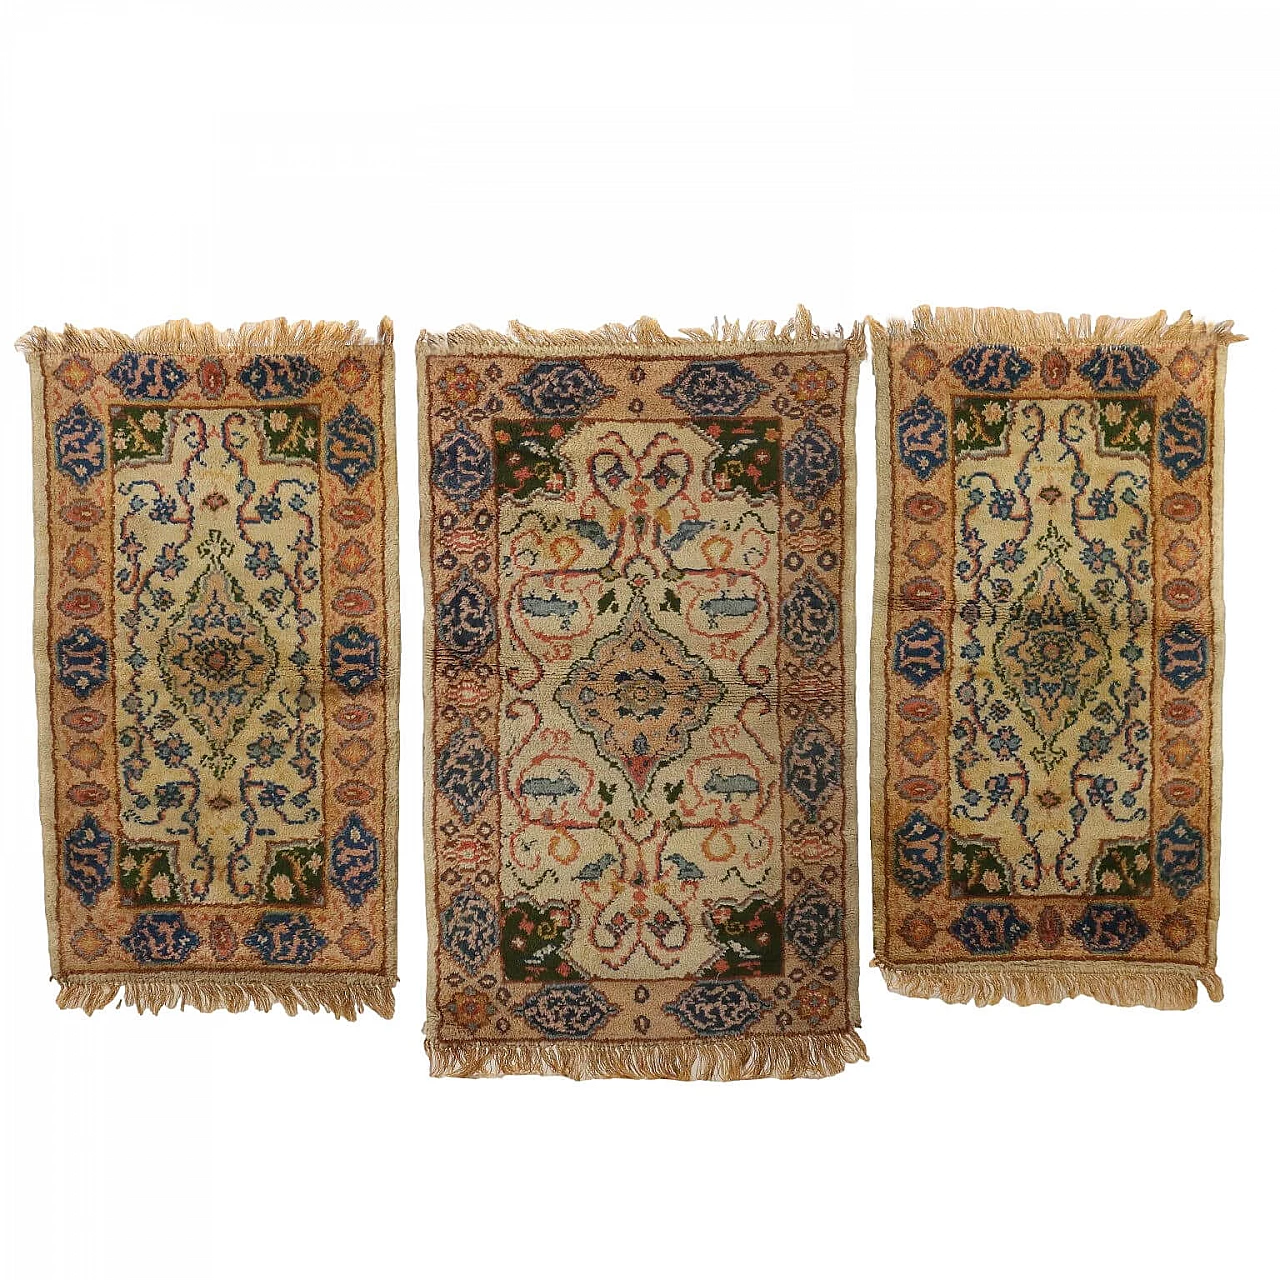 3 Moroccan cotton and wool Marrakech rugs 1